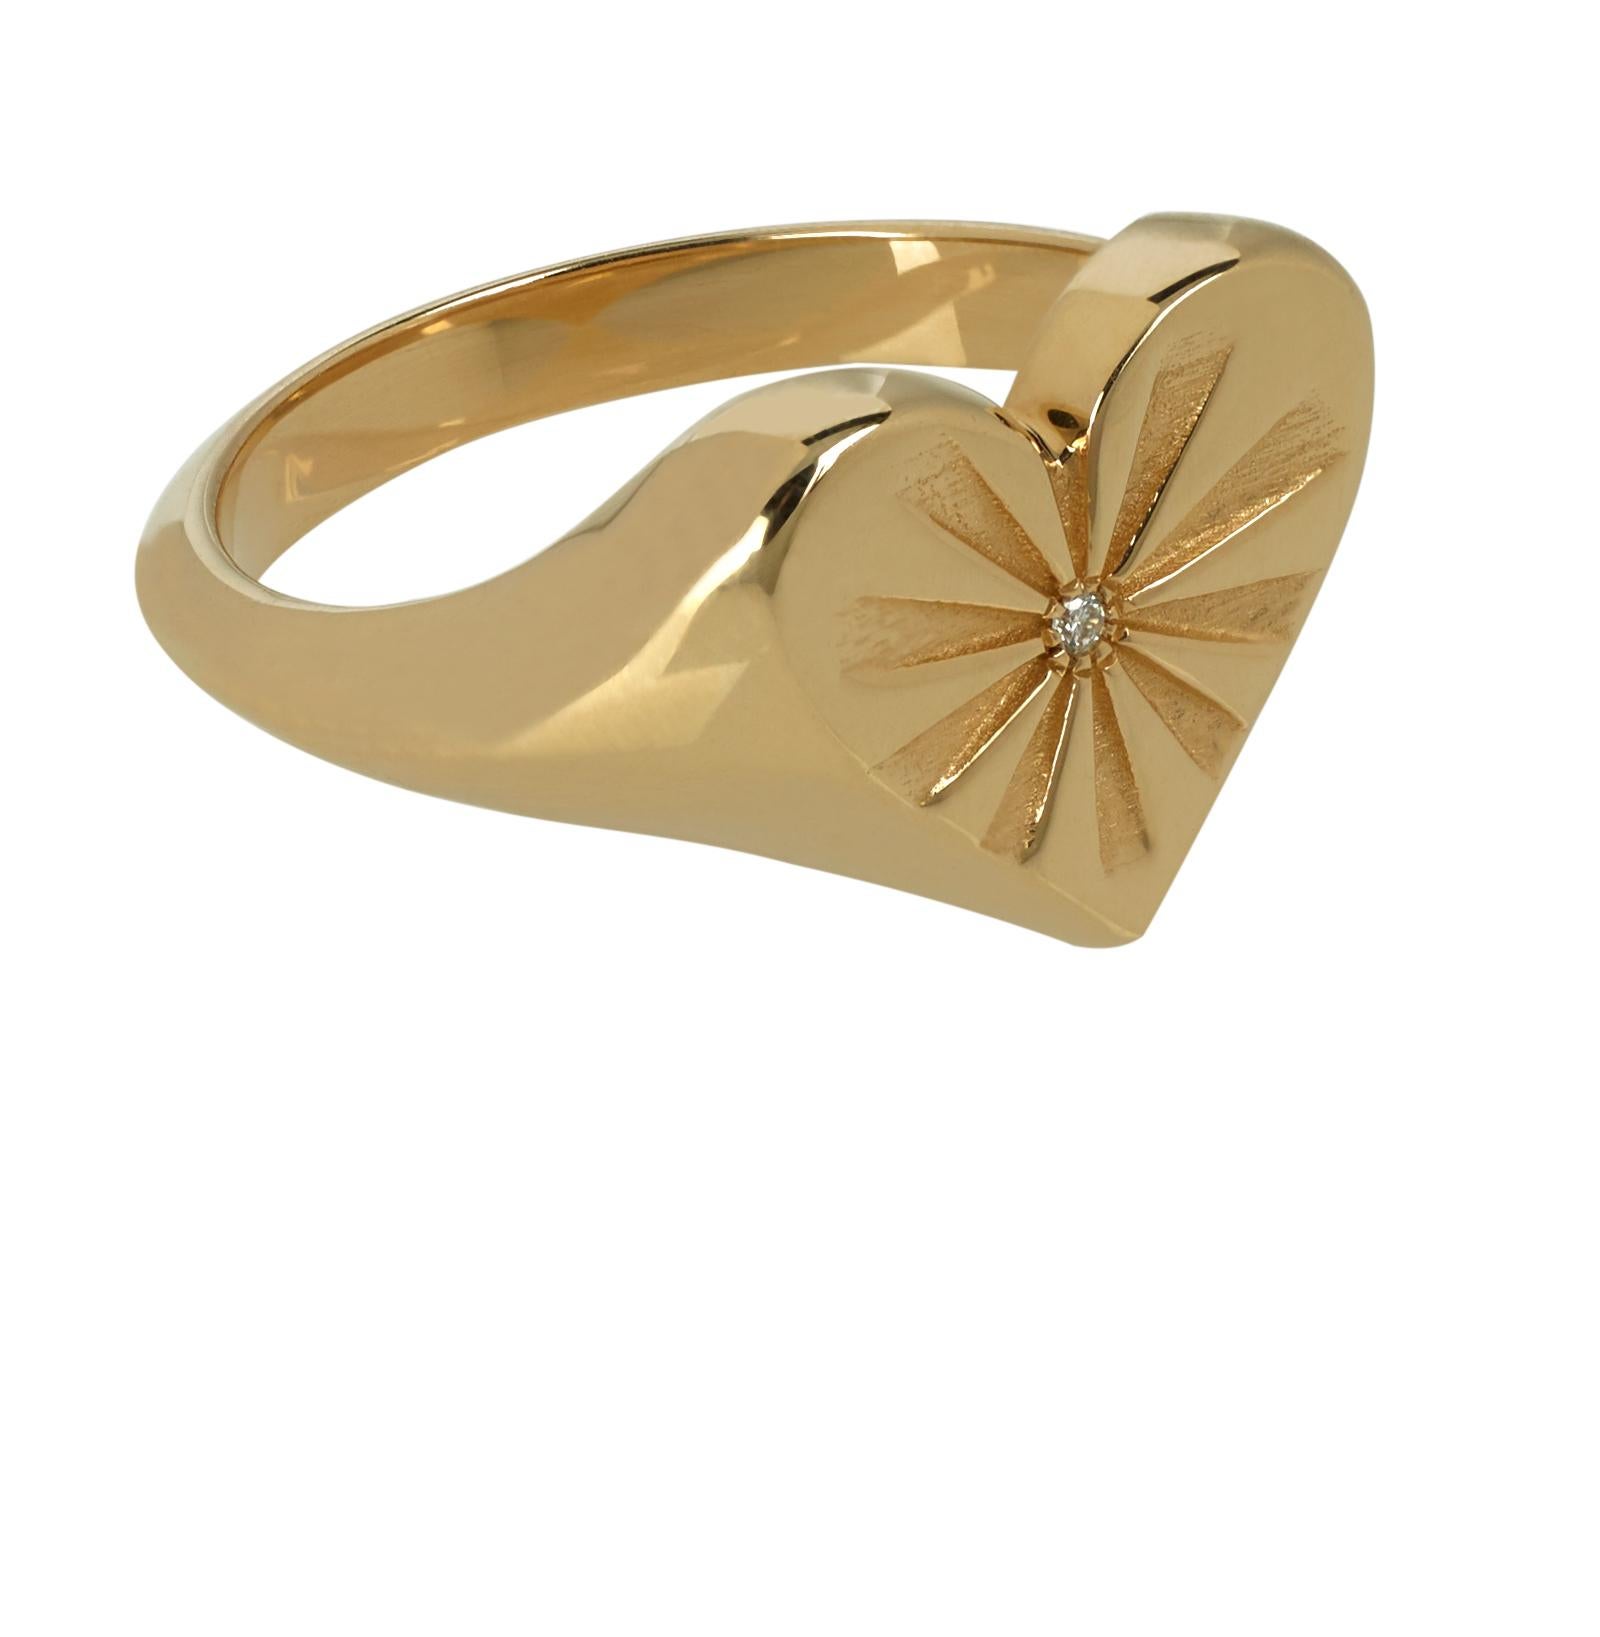 Marlo Laz's twist on a traditional signet, this heart of gold pinky ring is an instant heirloom. This romantic valentine 14 karat love ring features a white diamond and sun-rays of sunshine. Perfect for Valentines Day!

This ring is available in all